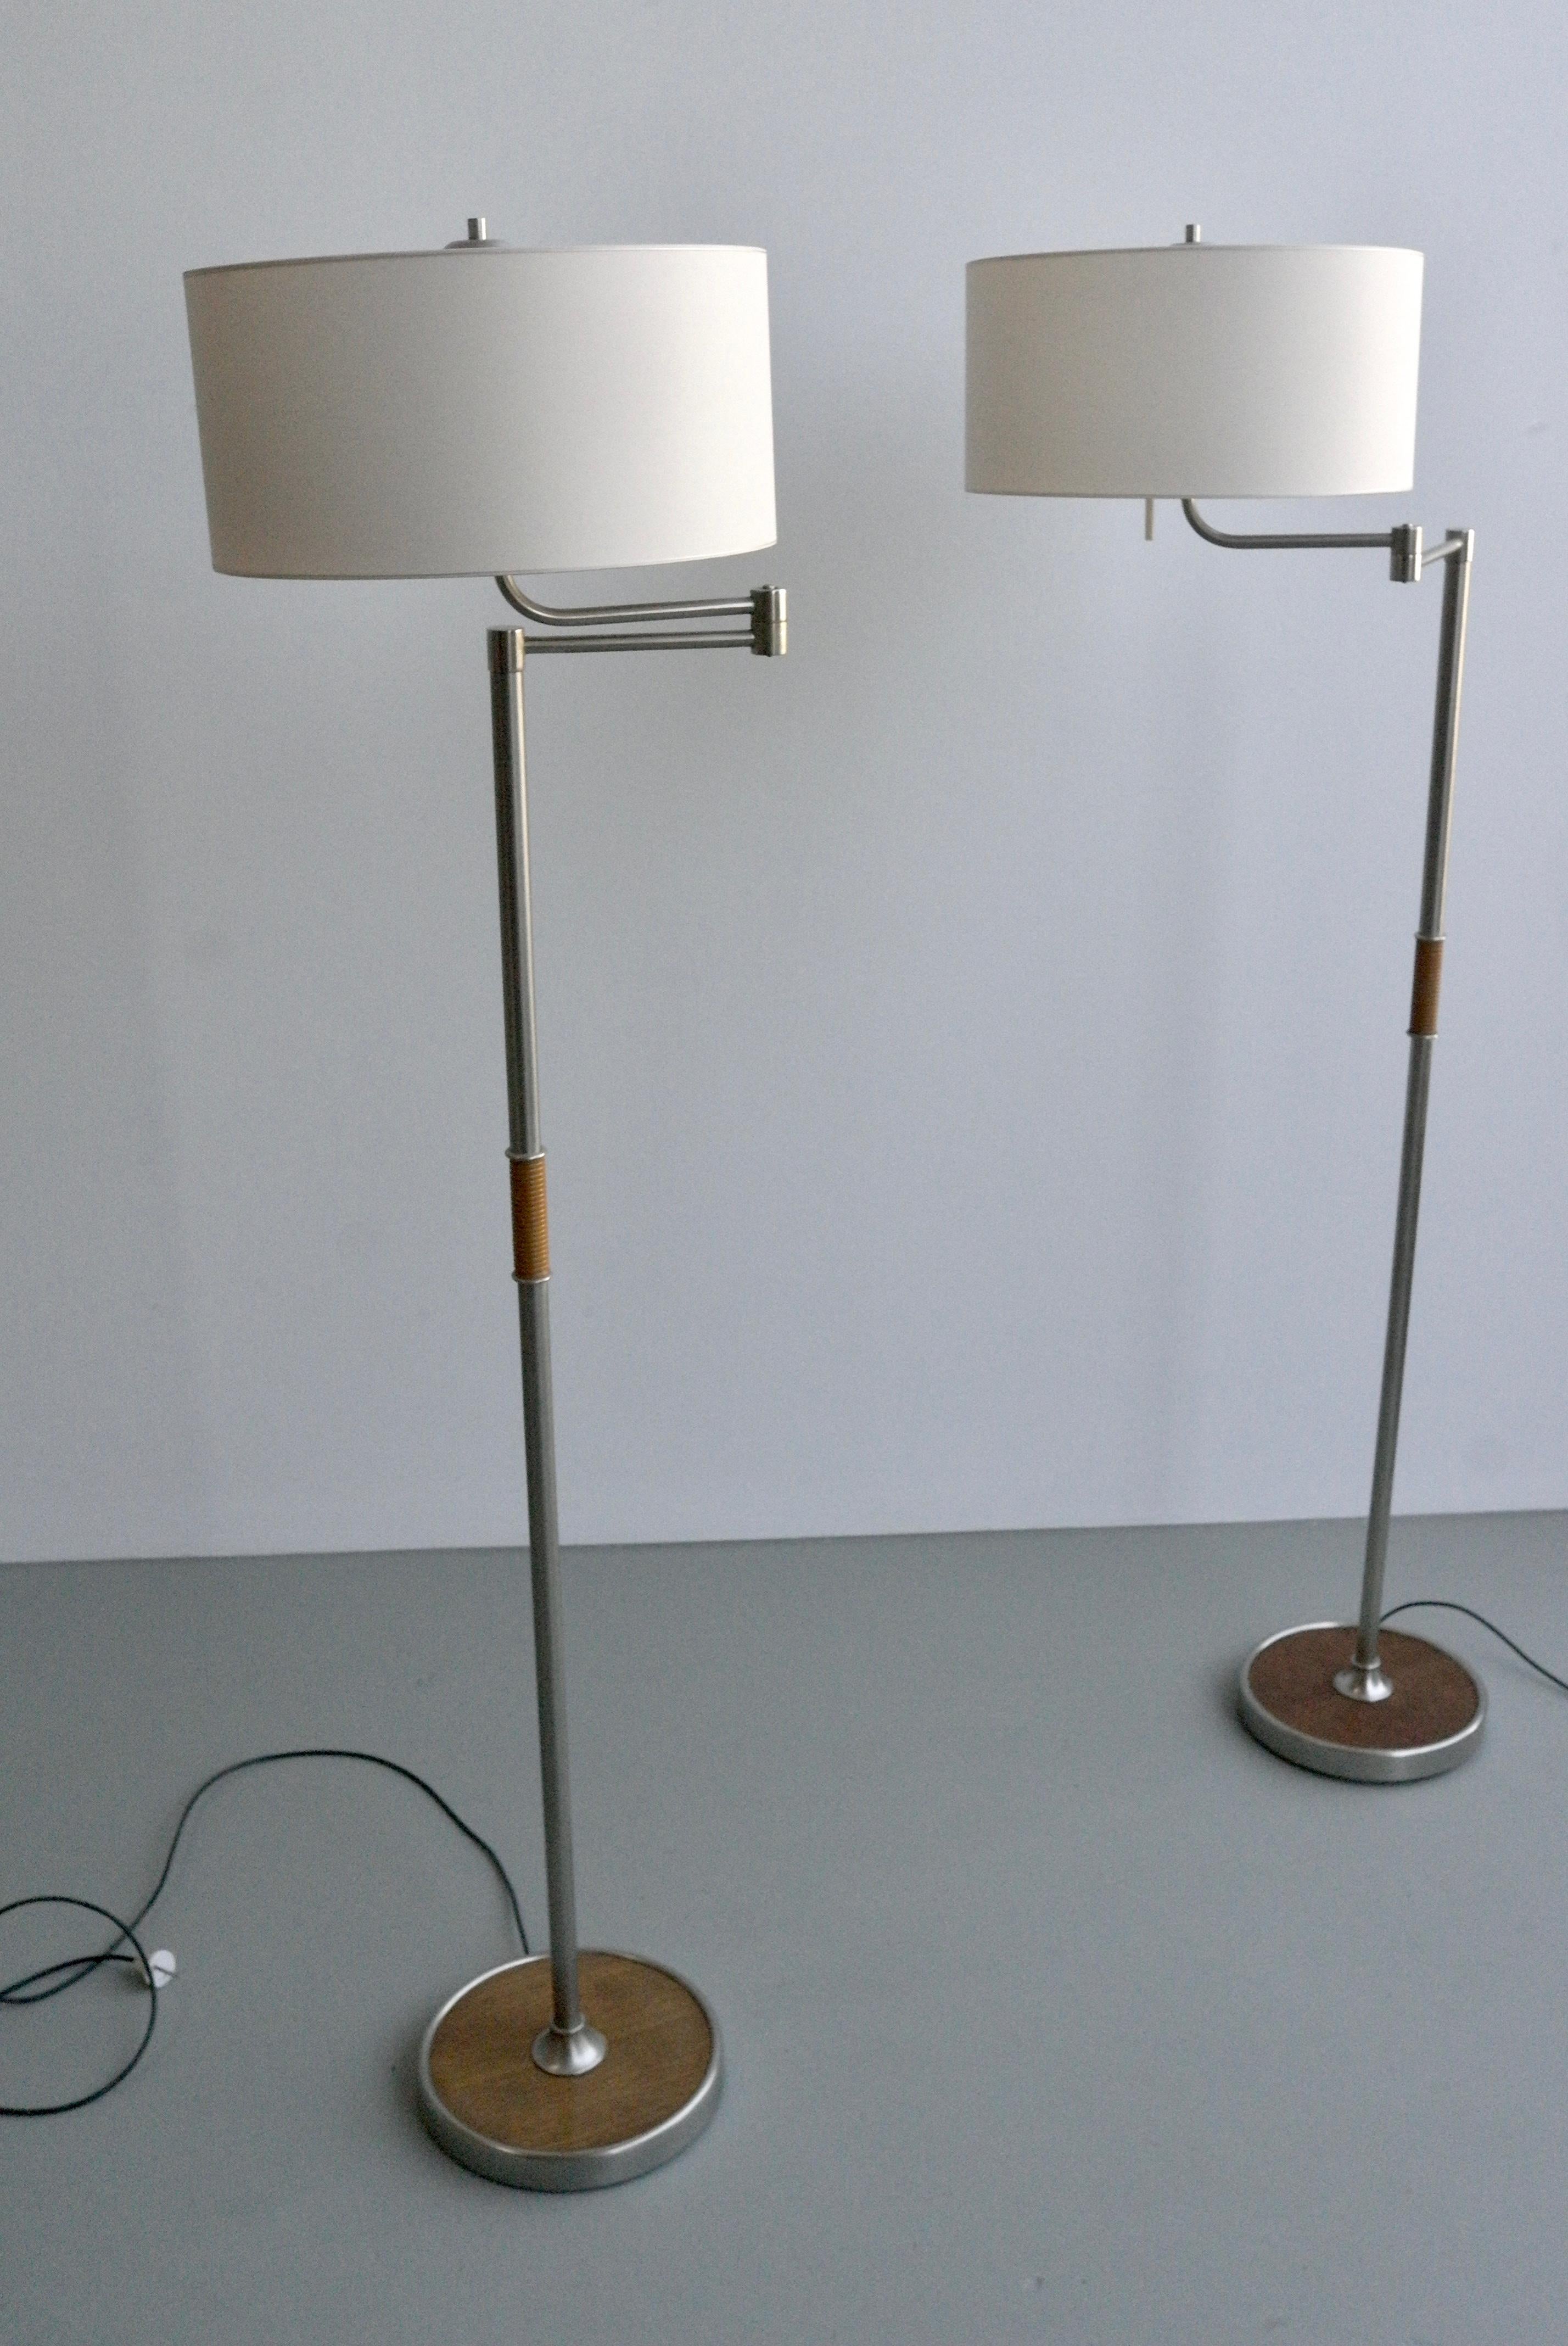 Mid-20th Century Pair of Midcentury Swing-Arm Floor Lamps in Metal with Faux Bamboo Wood Details For Sale